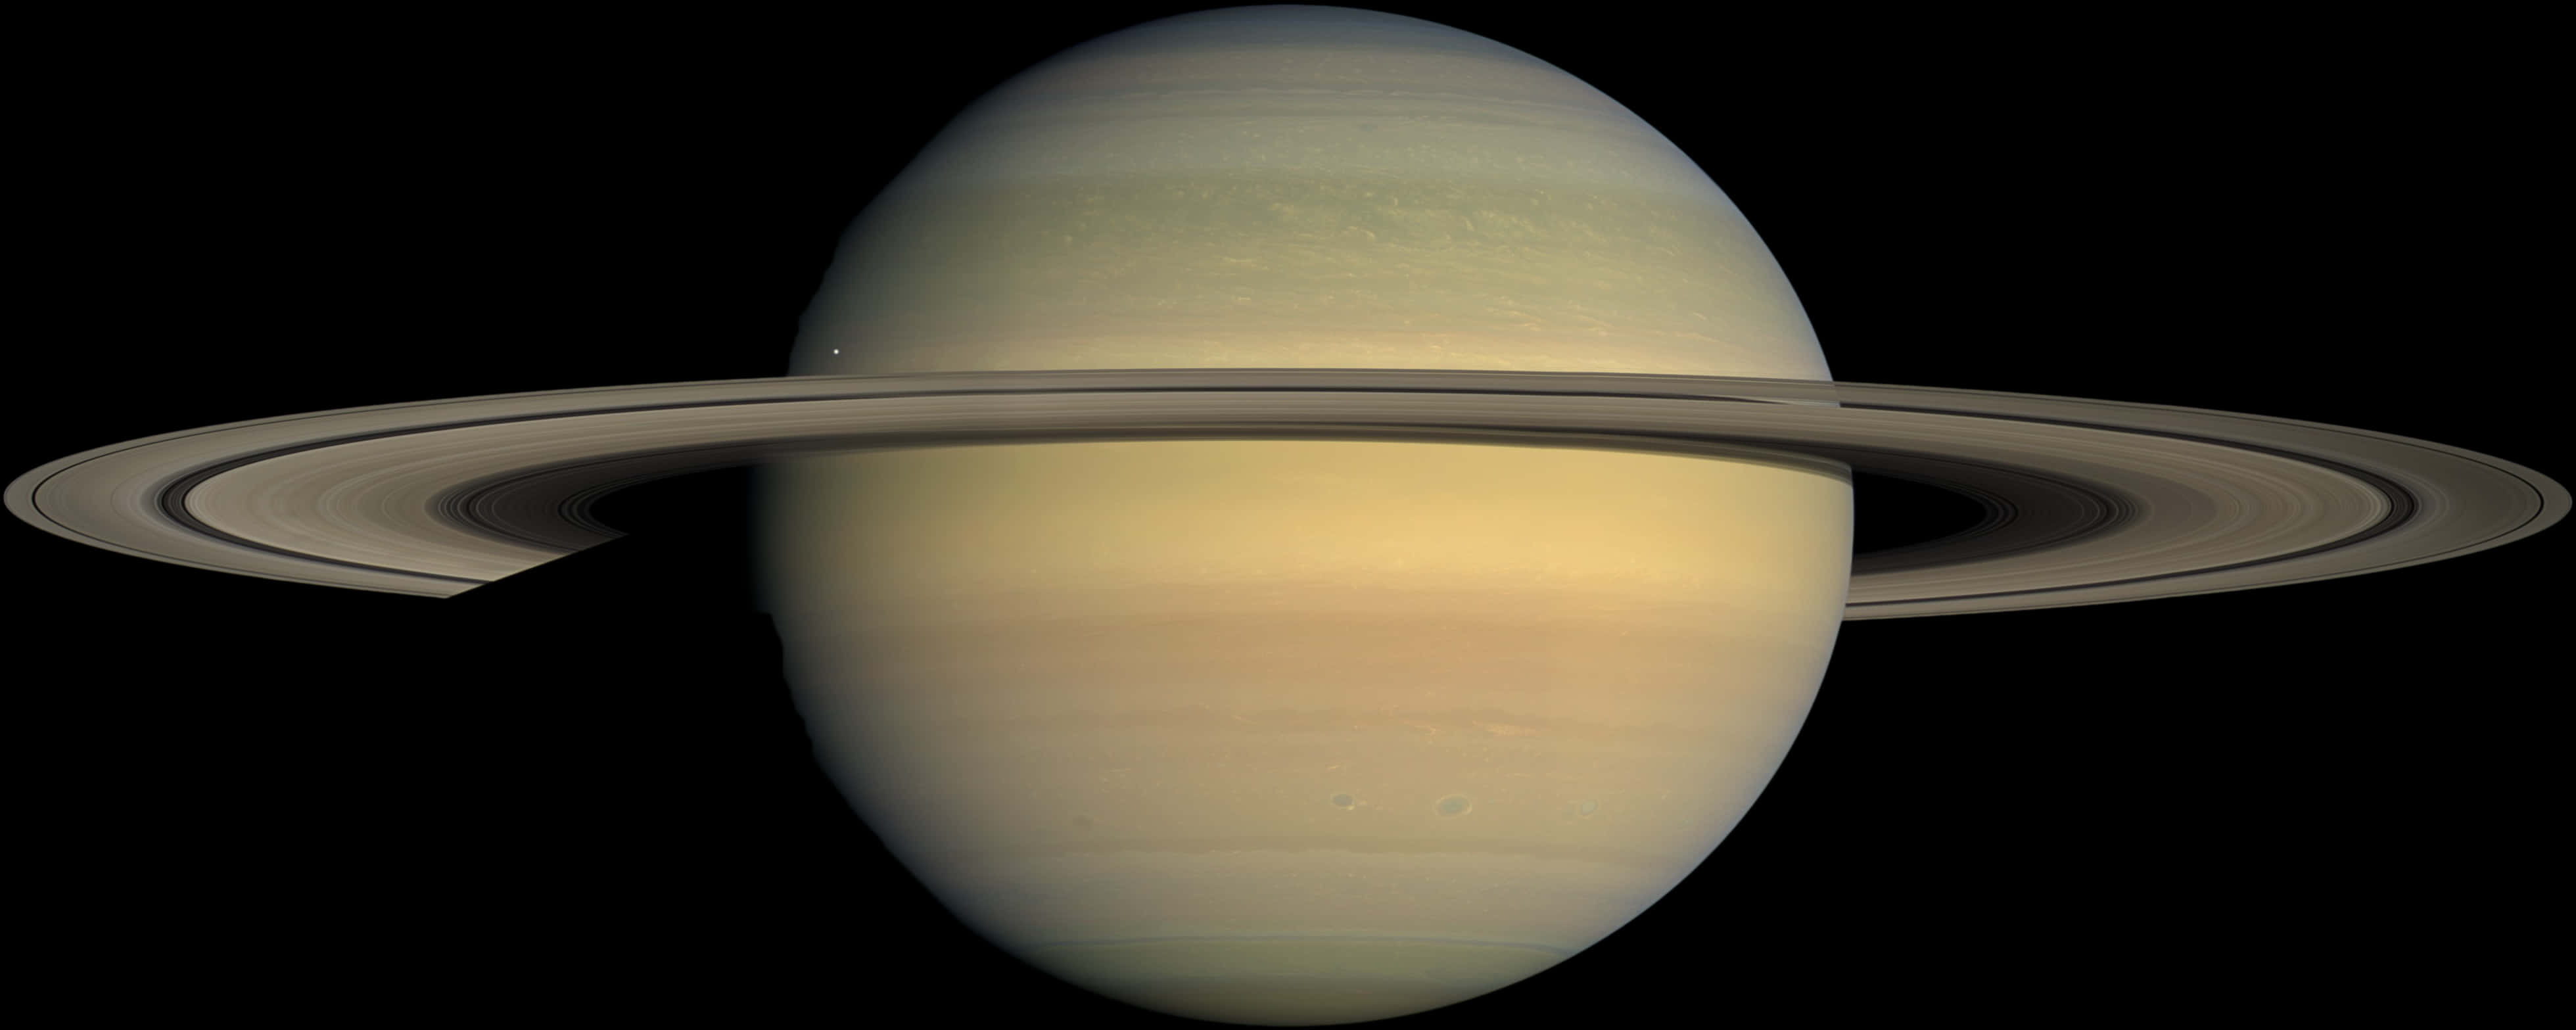 Saturn Planet Rings Space View